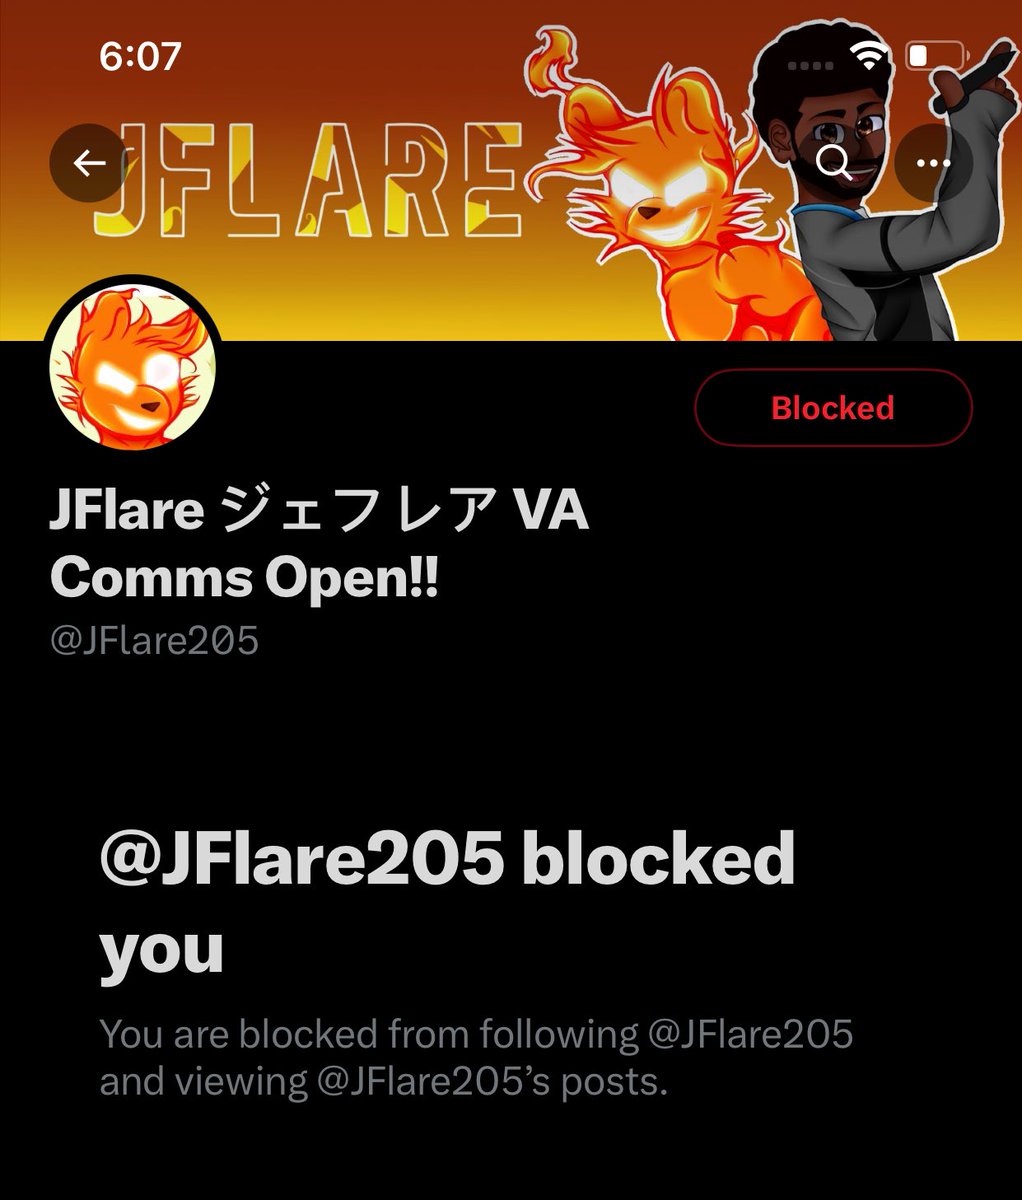 Speaking in reminders. Please don’t let this go under the carpet. 

Flare is a groomer. He has groomed multiple minors, including my boyfriend who dealt with him when they were a minor.

When he got called out for his actions, all he did was act like the victim.